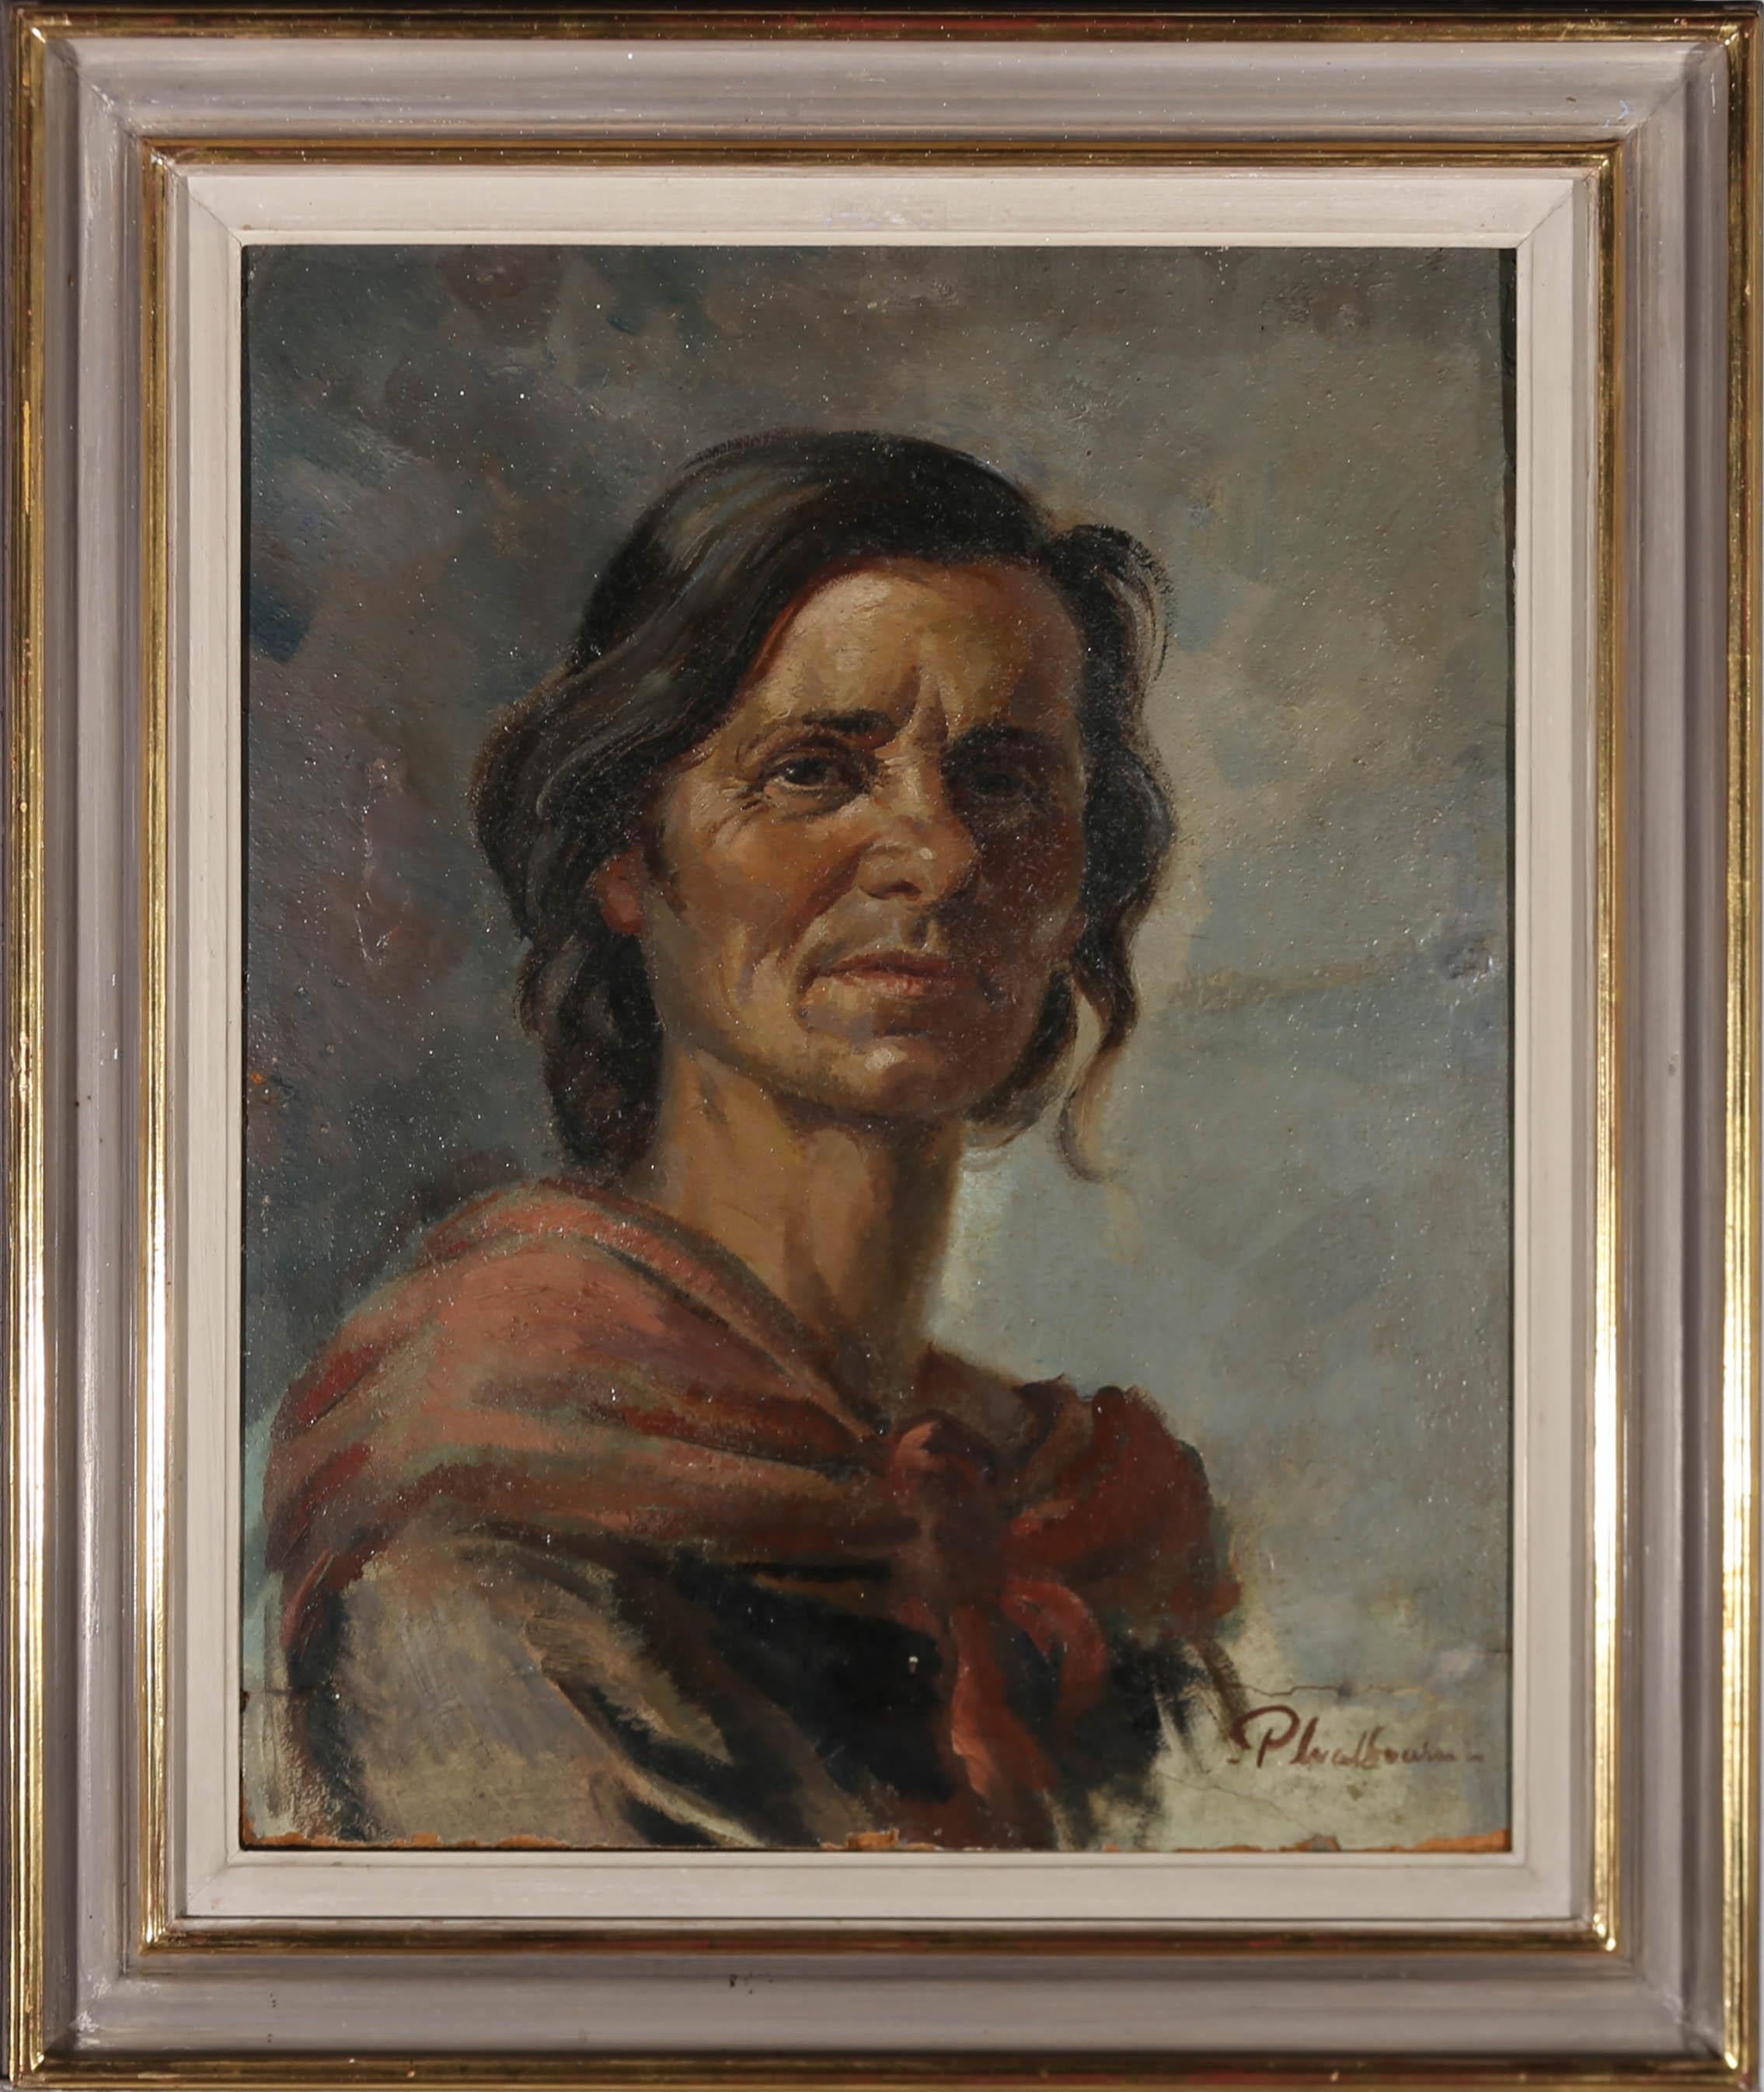 A fine 20th Century portrait in oil showing a striking looking Italian woman with a furrowed brow. She is wearing a red shawl around her shoulders and has a regal posture and stare, despite her weathered face and clothes. The artist has signed to